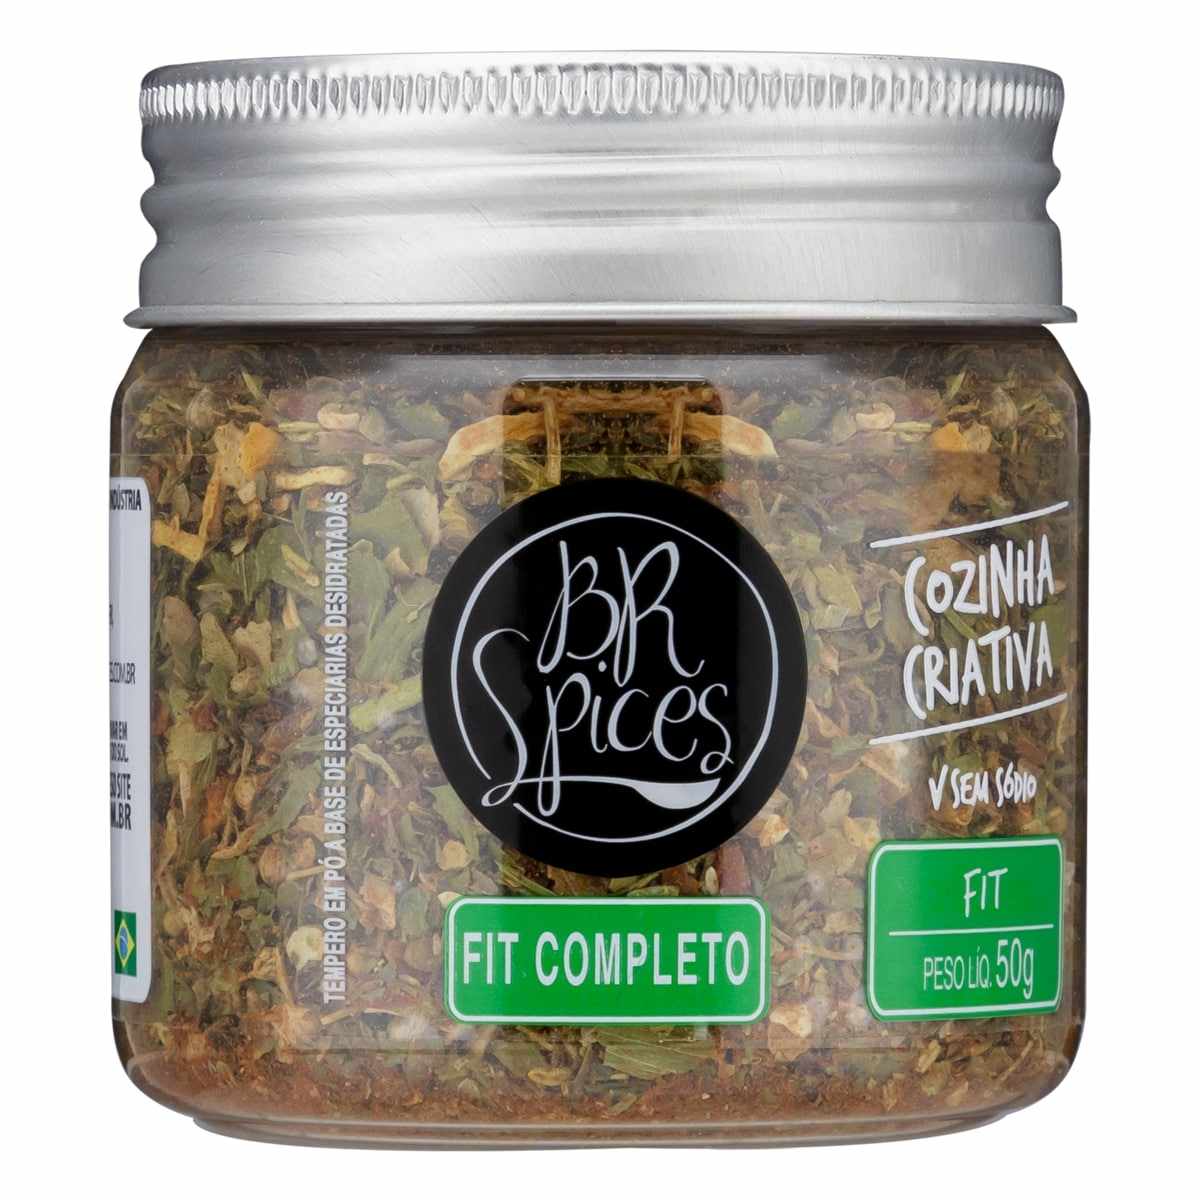 TEMPERO FIT COMPLETO BR SPICES 50GR                                                                 